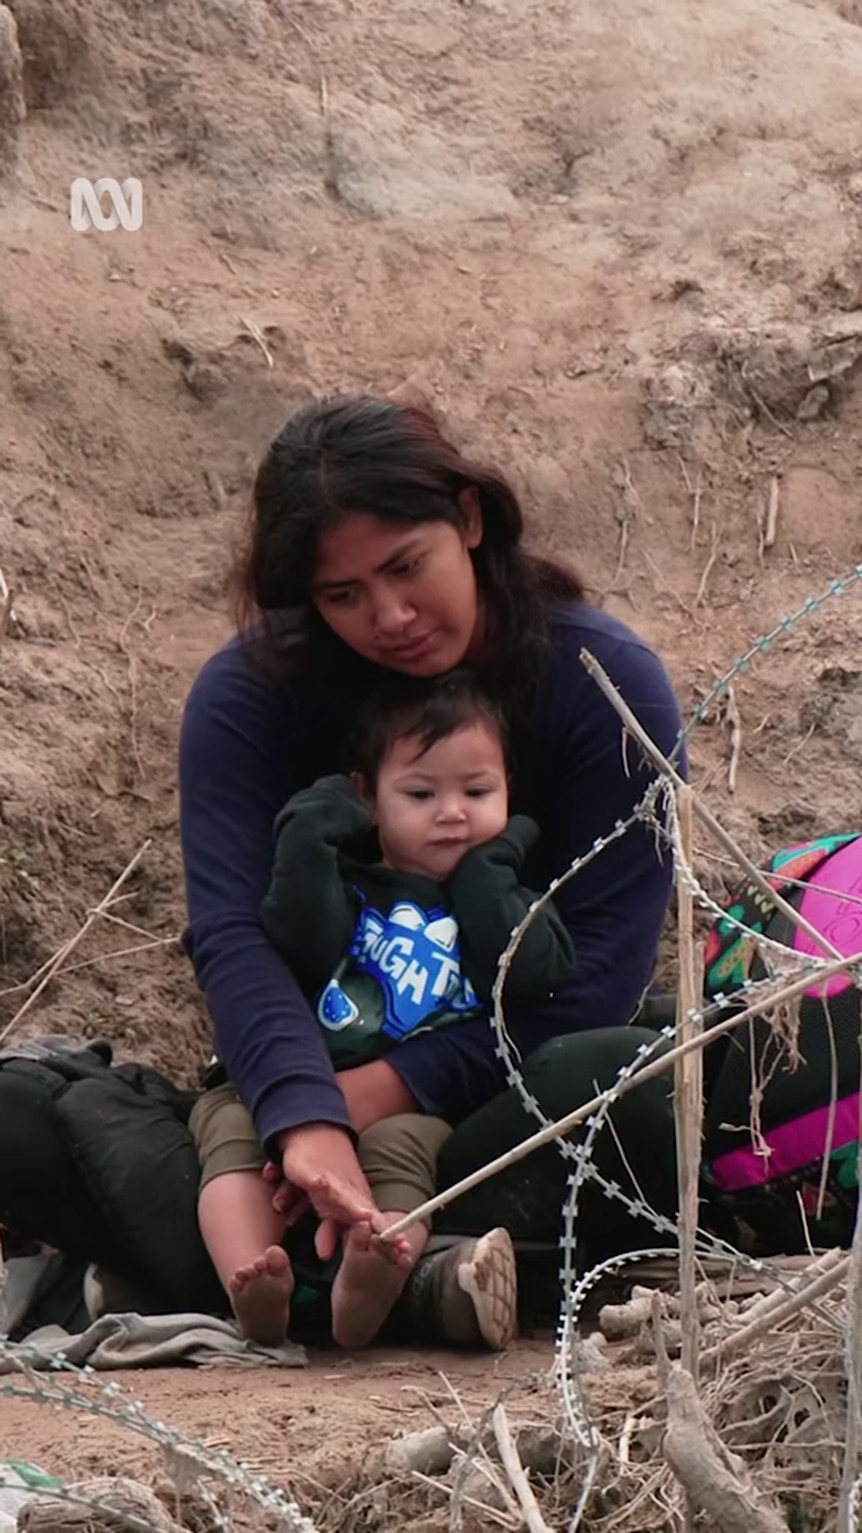 A young brown-skinned woman holds a toddler in her arms as they sit on dirt behind razor wire